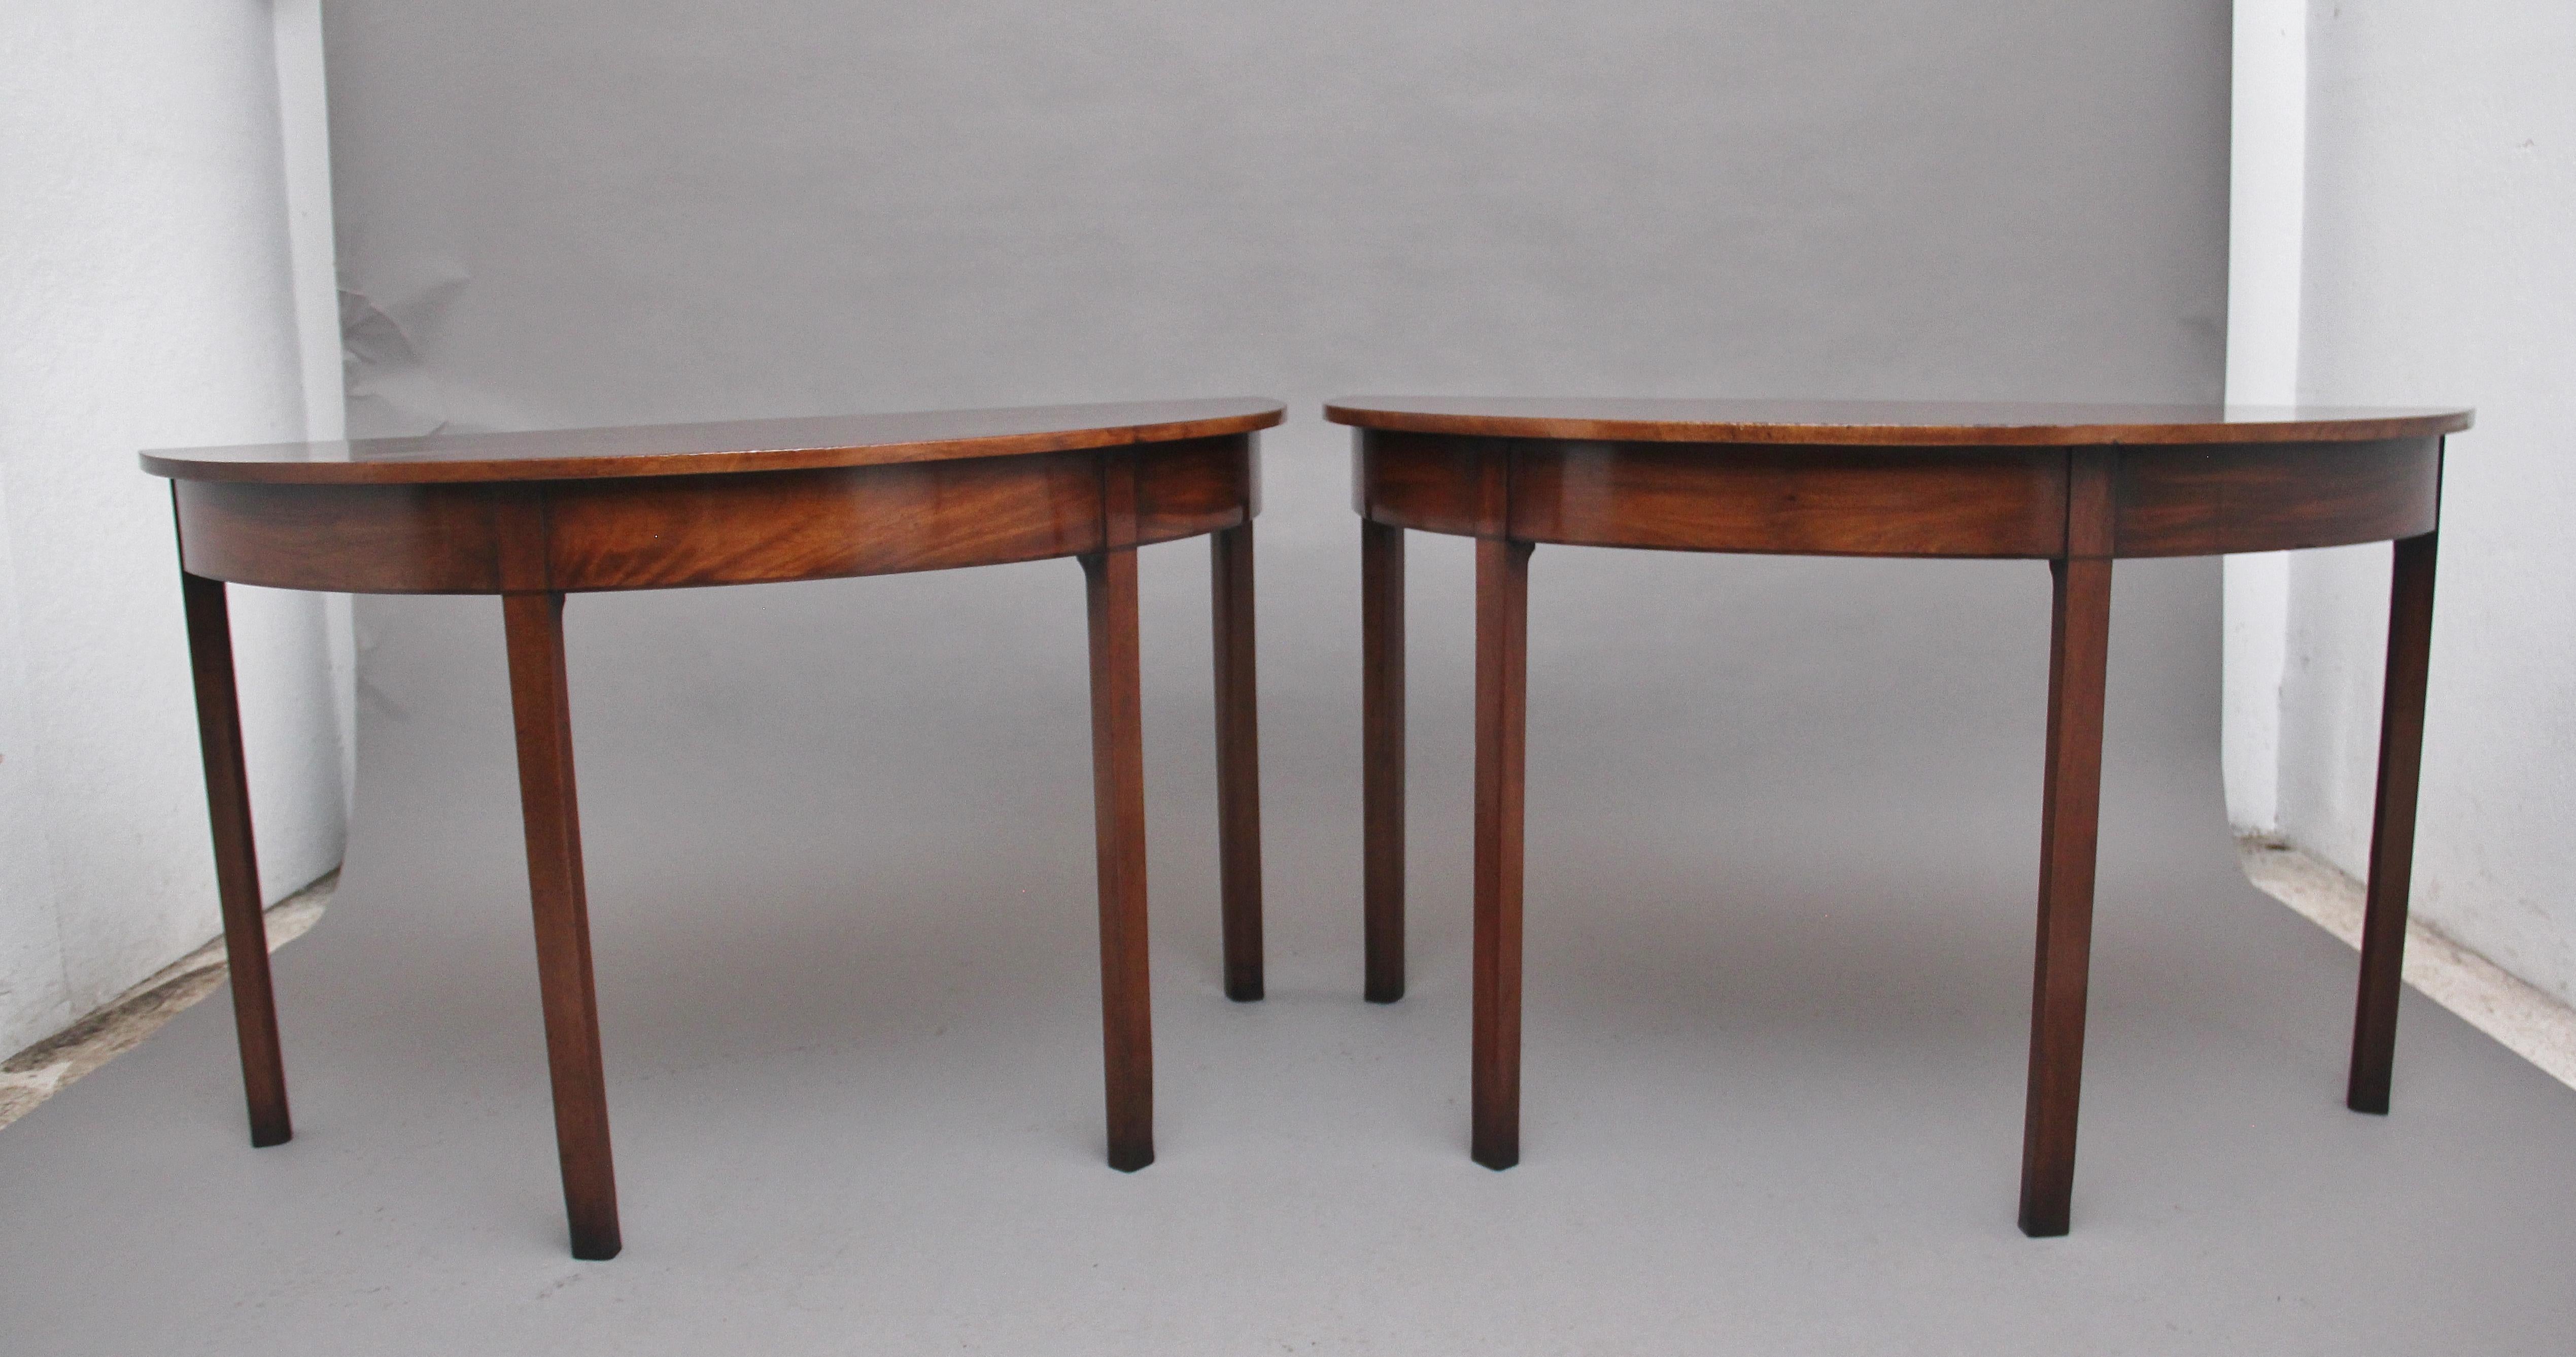 A fine pair of early 19th century mahogany demi-lune console tables, having lovely figured tops above a deep frieze supported on square tapering legs, lovely colour and in excellent condition. Circa 1800.
  